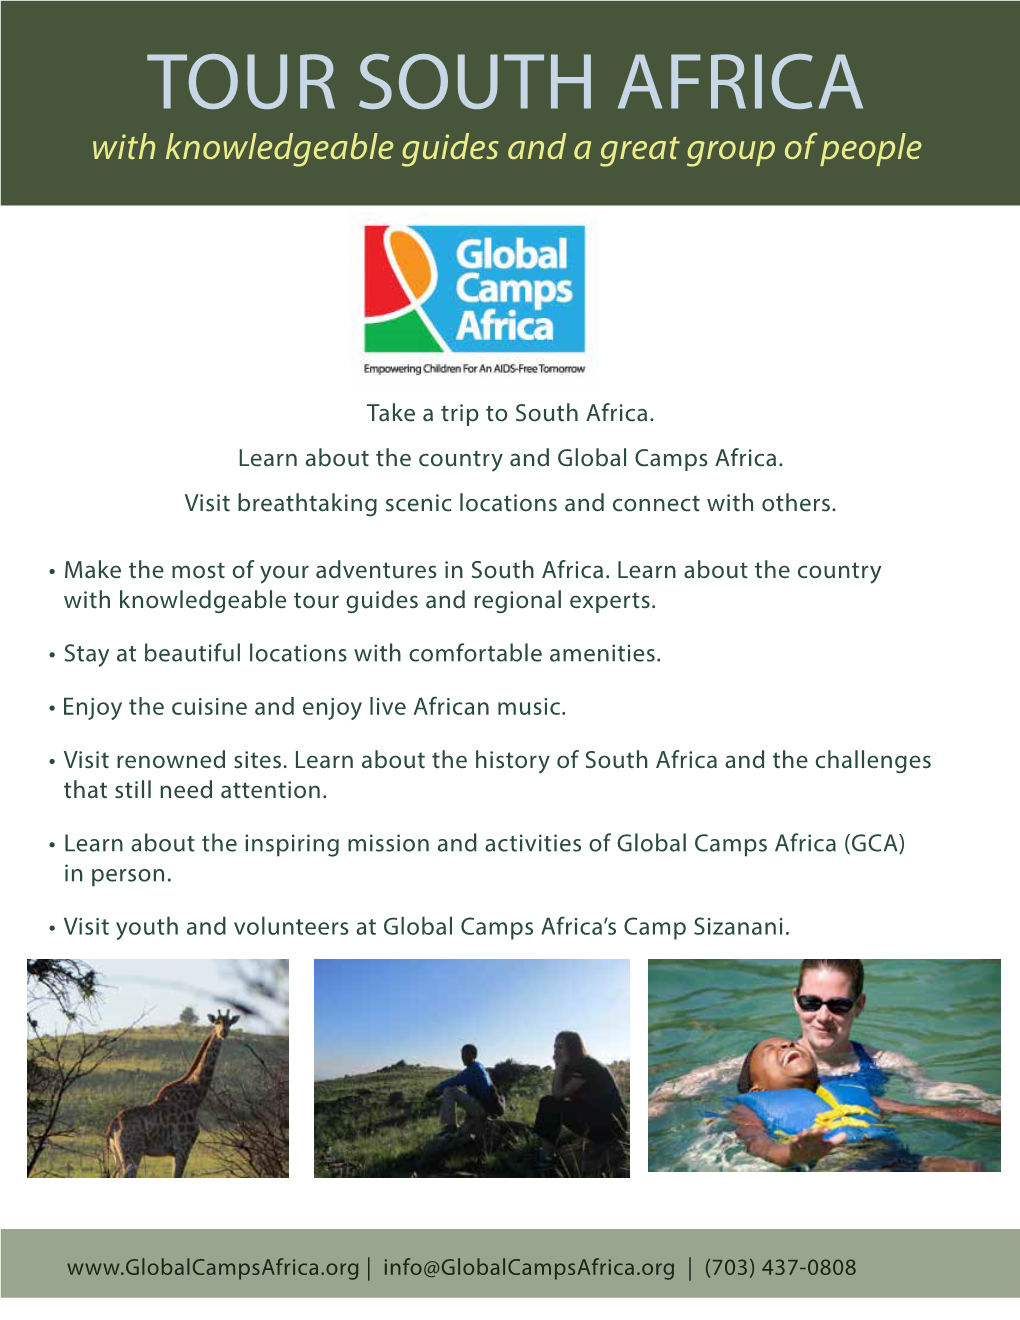 TOUR SOUTH AFRICA with Knowledgeable Guides and a Great Group of People